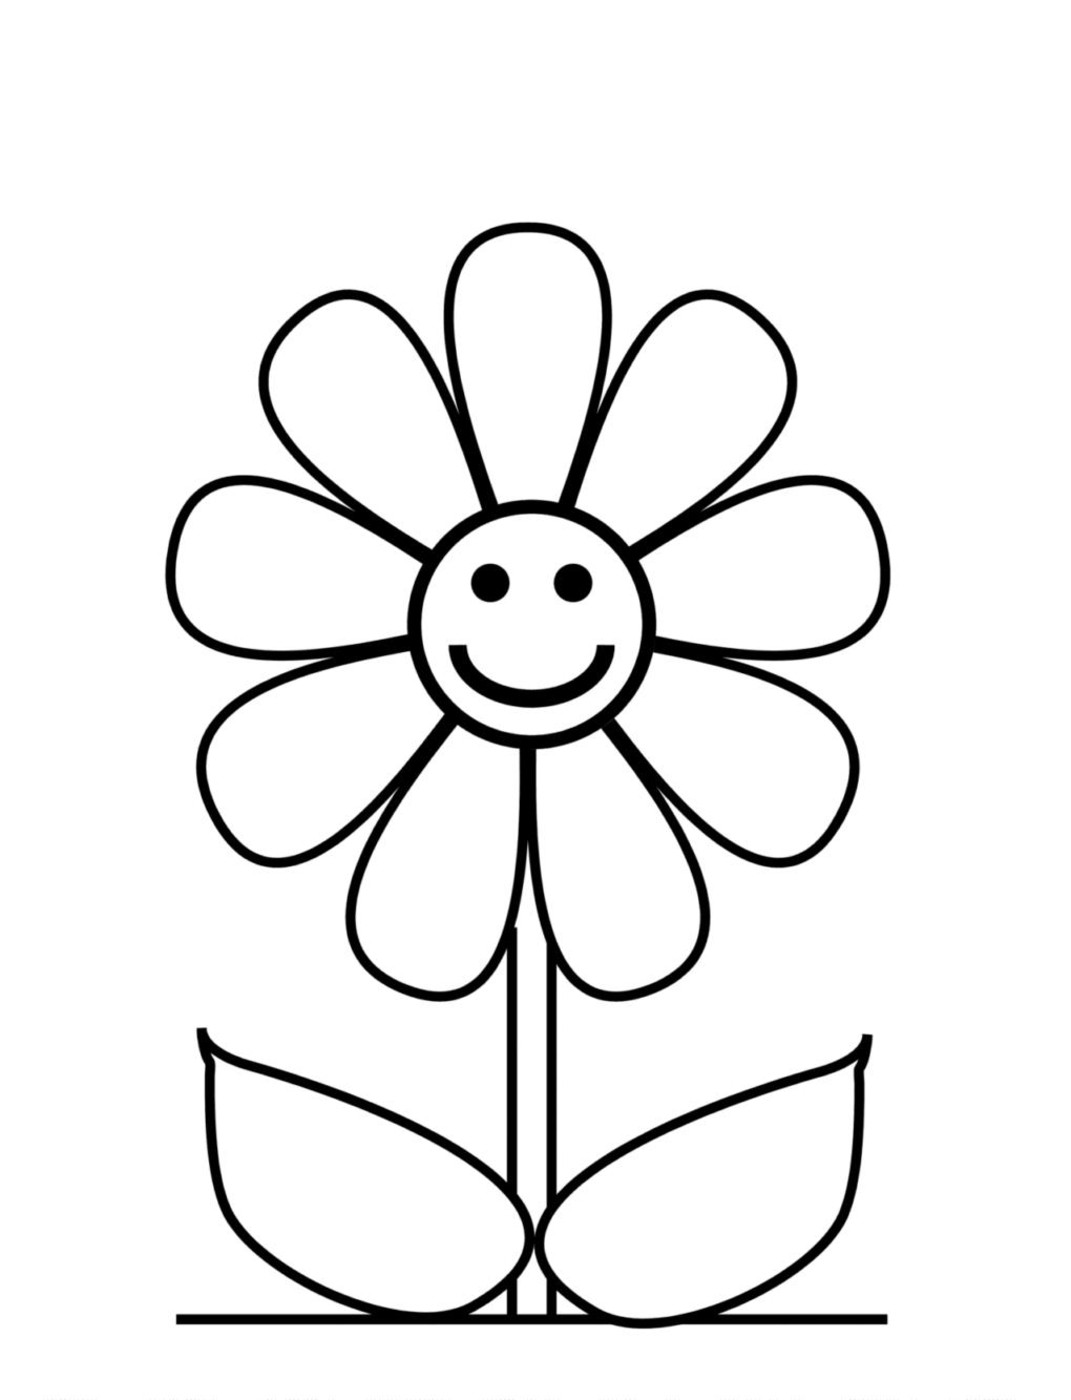 Flower Coloring Pages - FREE Printable Coloring Pages | AngelDesign